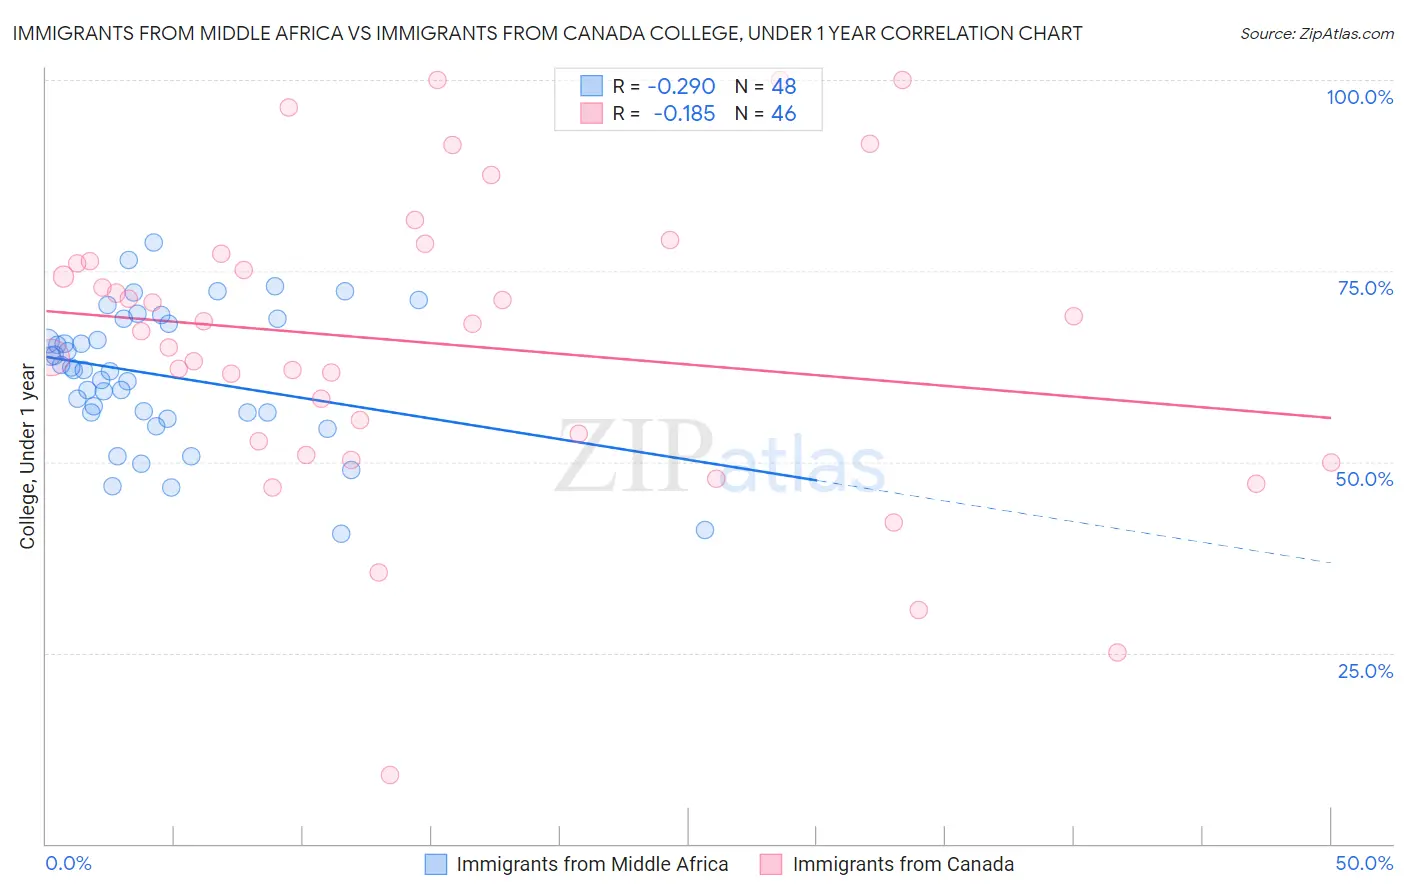 Immigrants from Middle Africa vs Immigrants from Canada College, Under 1 year